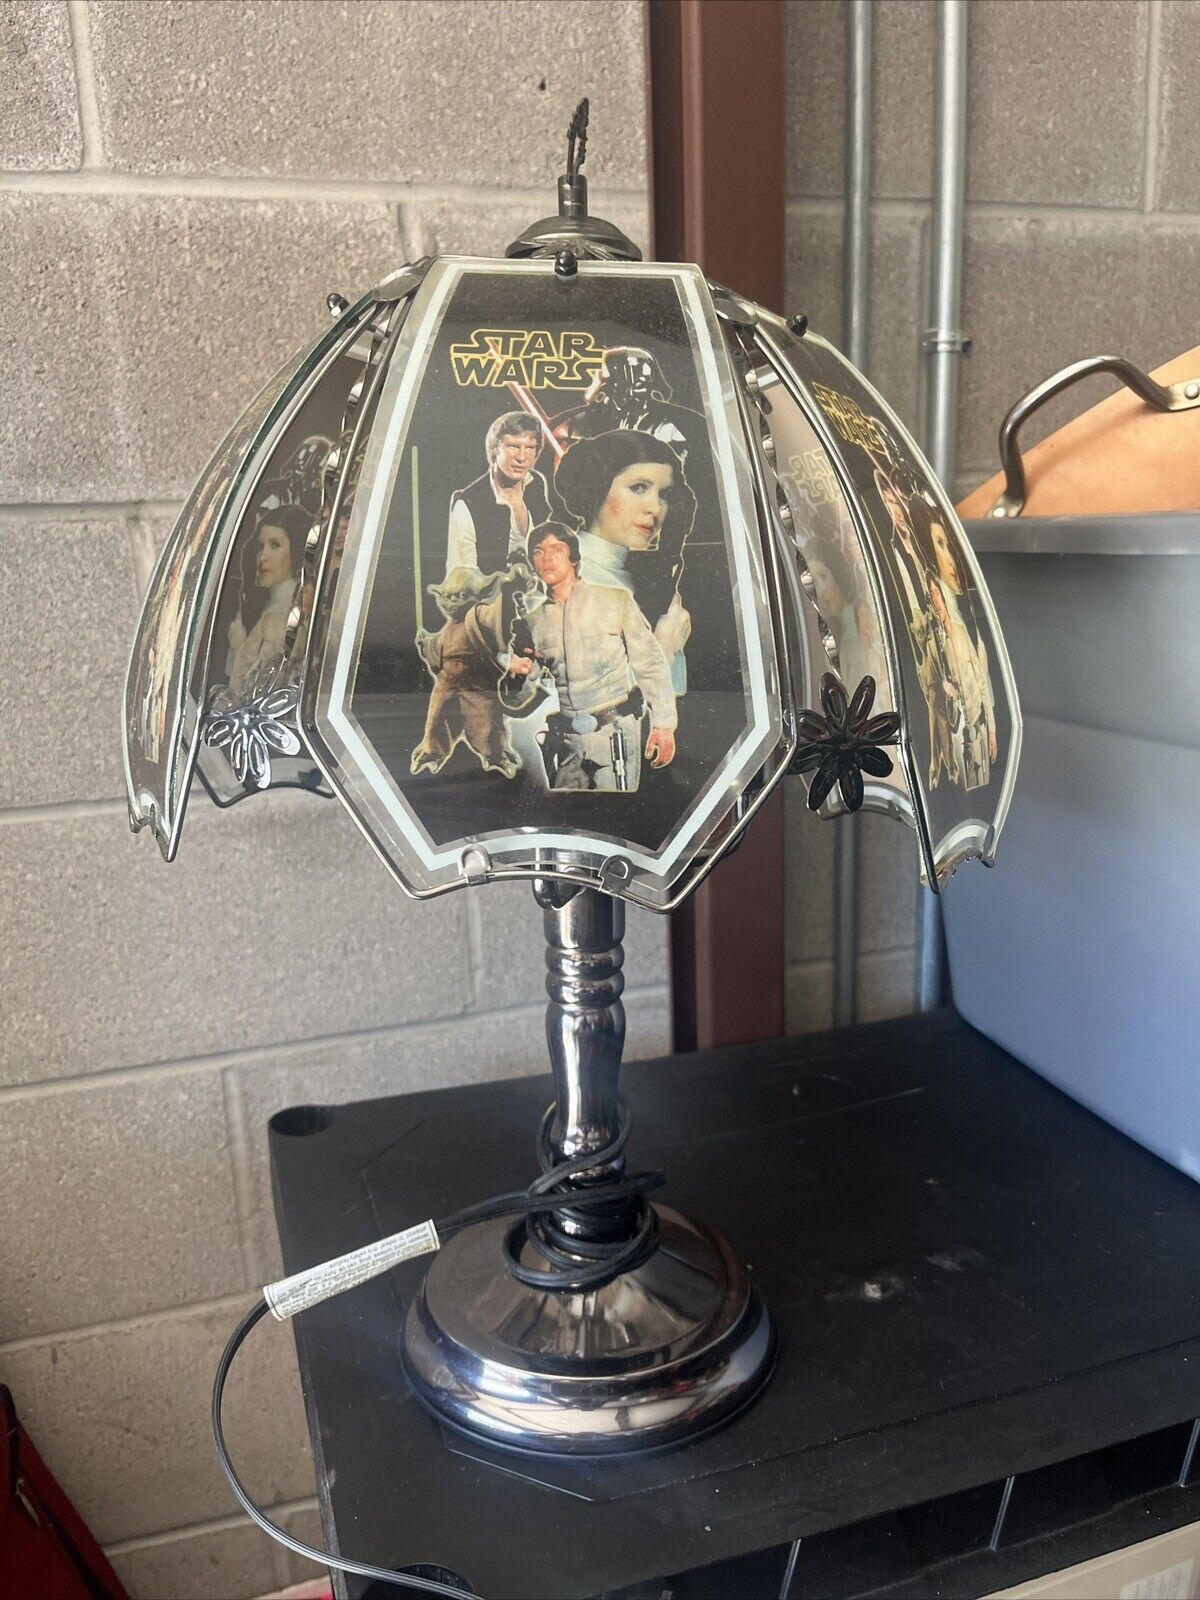 Star Wars, Empire Strikes Back, 3 Way Touch Lamp.